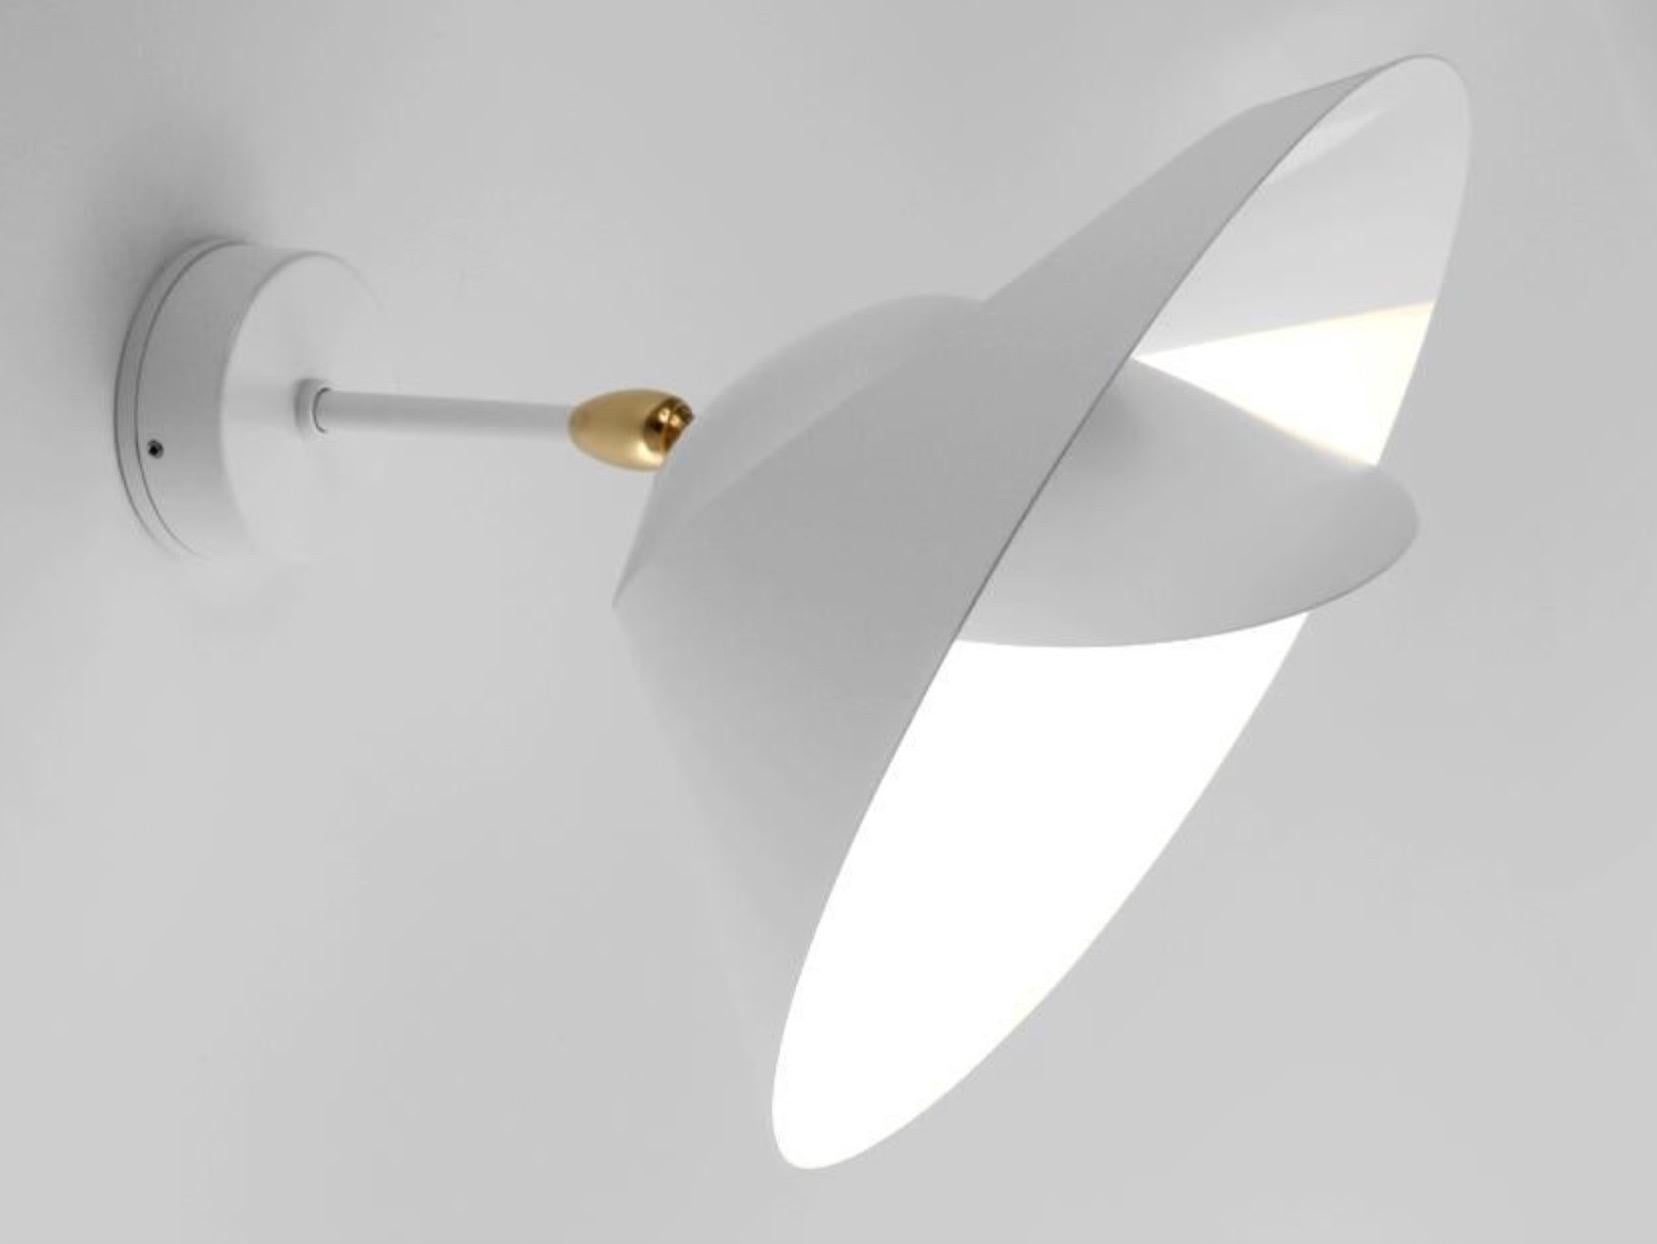 Wall lamp 'Saturne' in white version. Listed as 220-240 Voltage but can be used with right bulb in US, Canada hardwired or with plug as plug in. 

Originally designed in 1957, this iconic lamp is still made by Edition Serge Mouille in France using